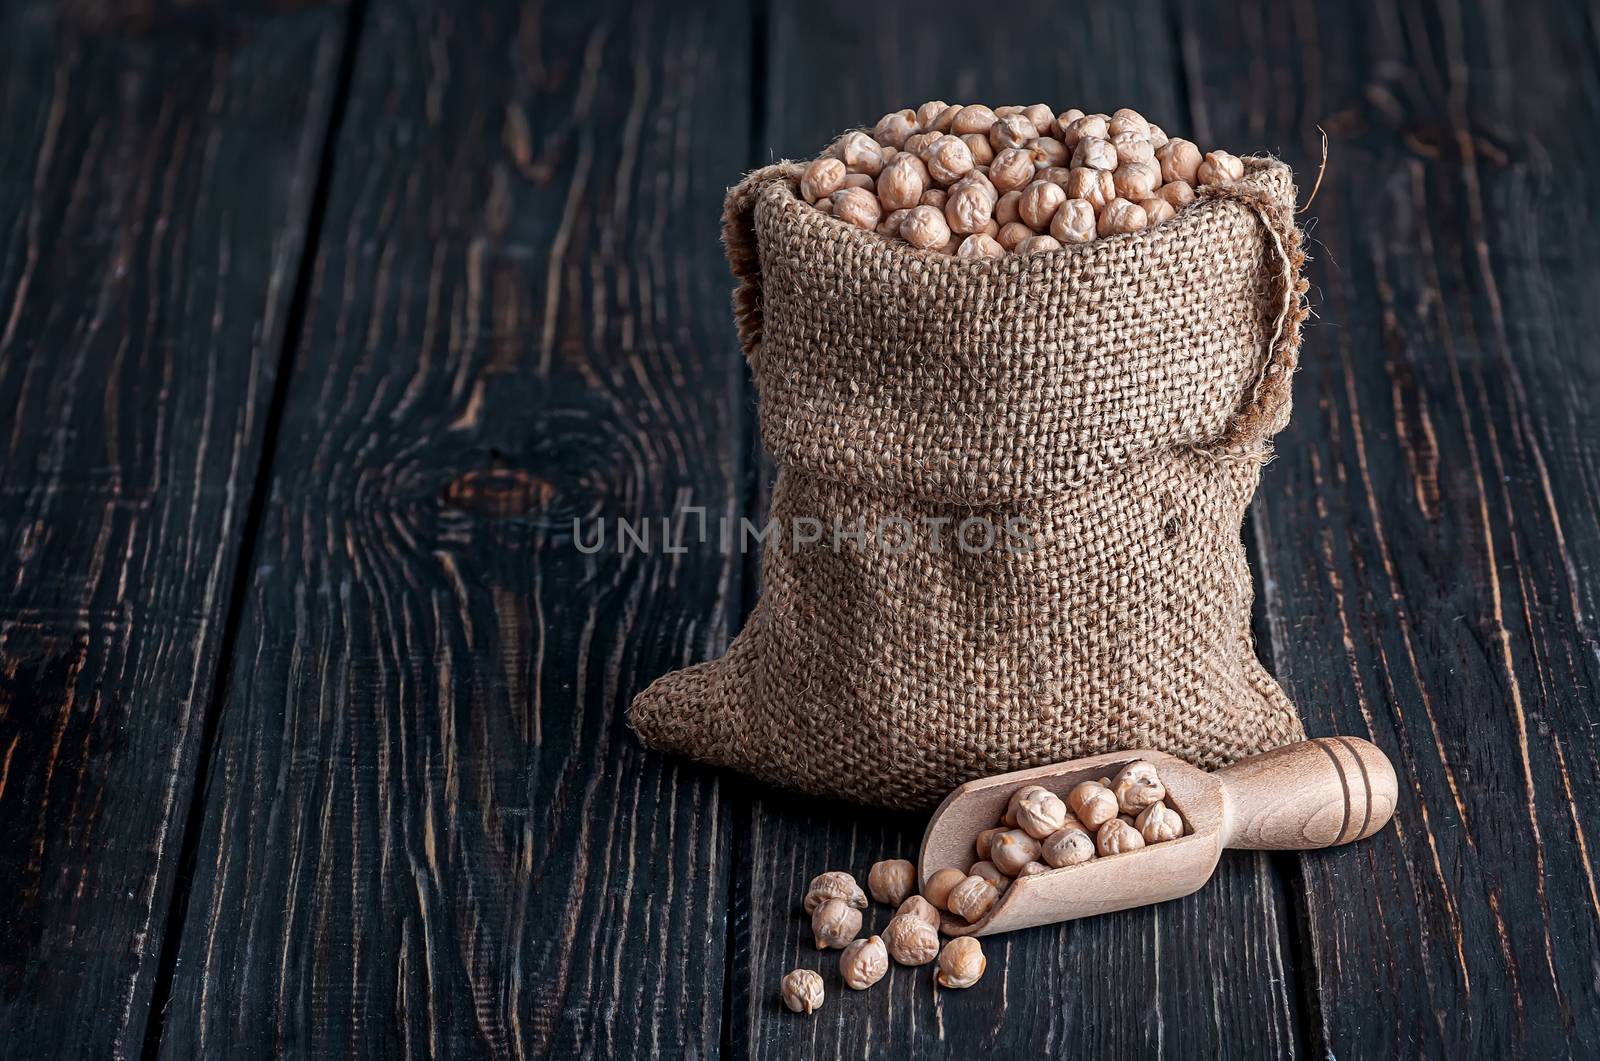 Chickpea in sack and scoop near on wooden table